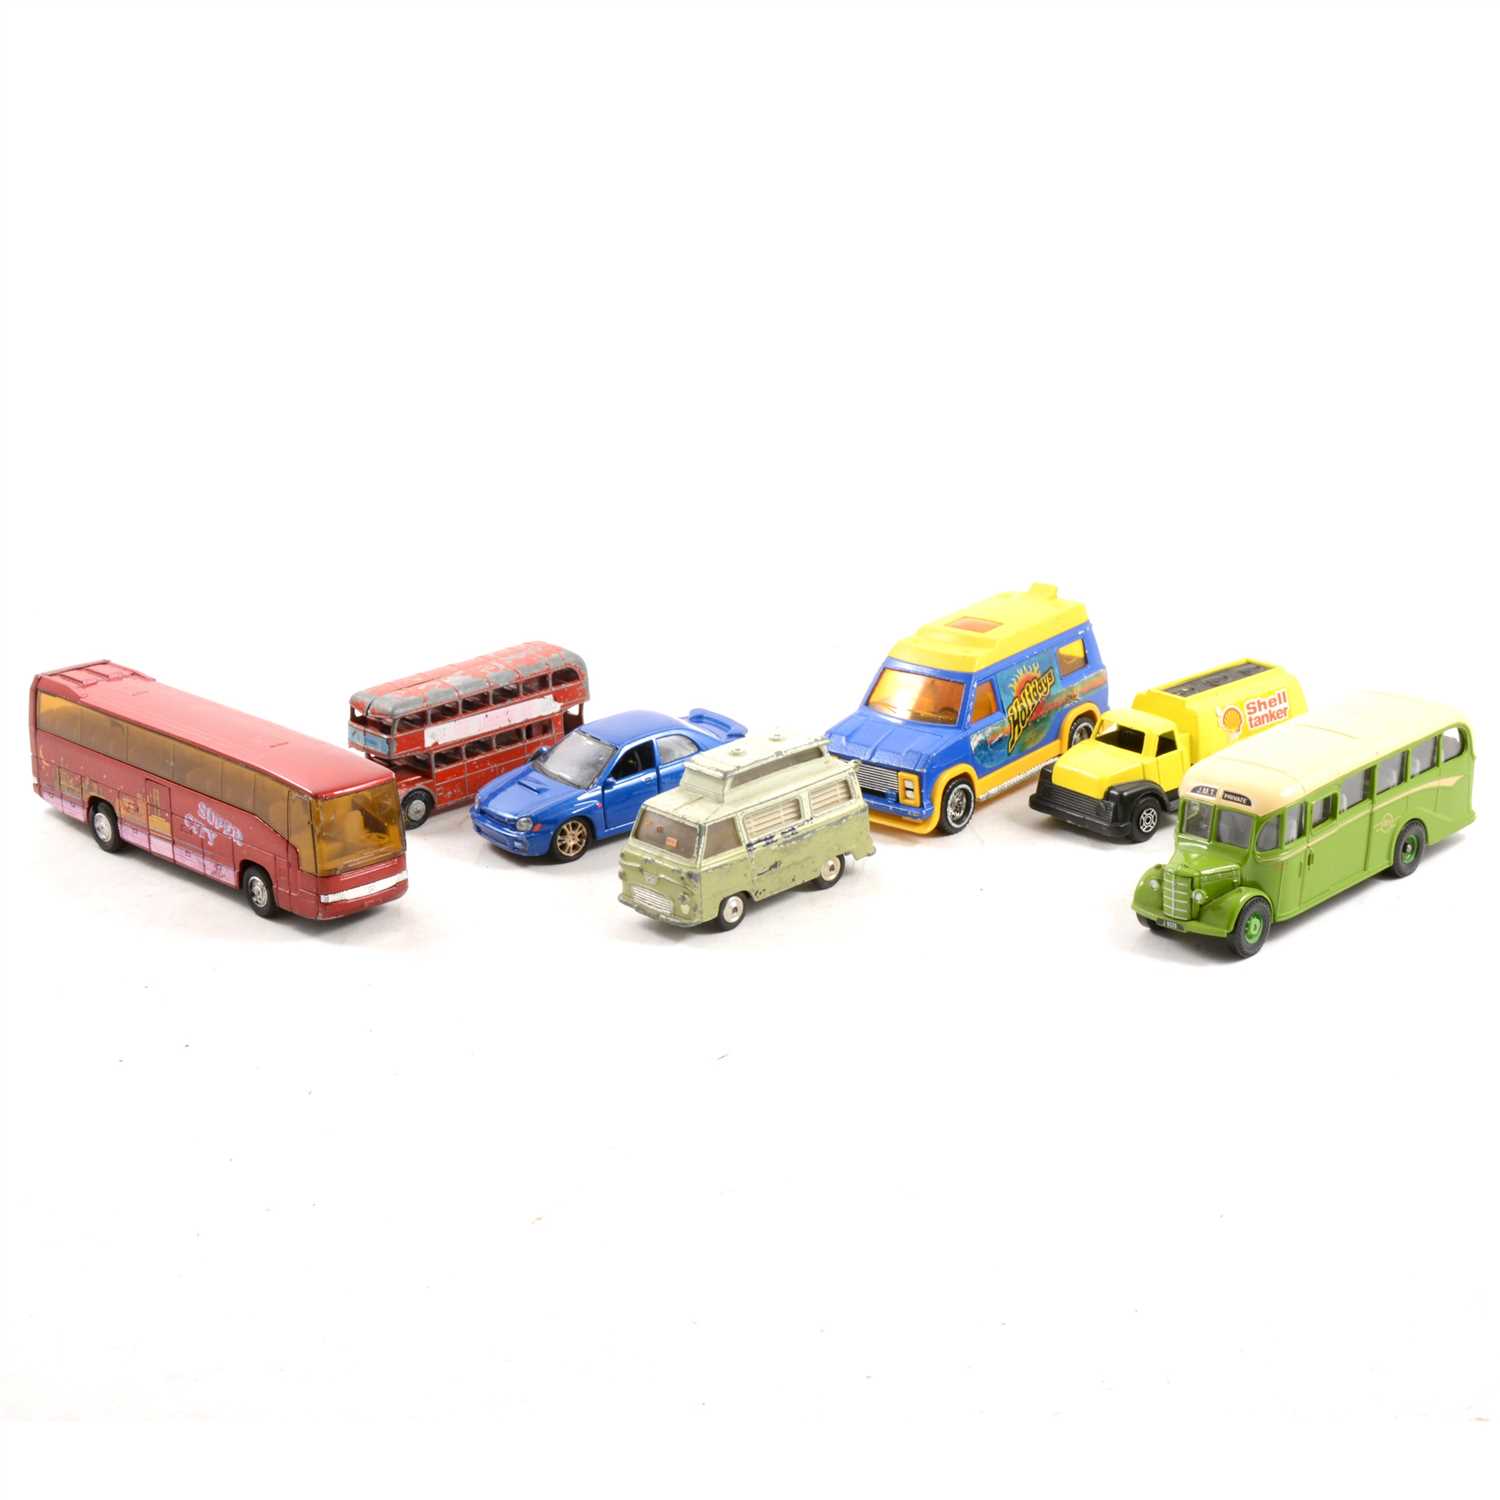 Lot 124 - Loose and playworn die-cast model cars and vehicles, including Tonka, Corgi, Britains and others, two trays.